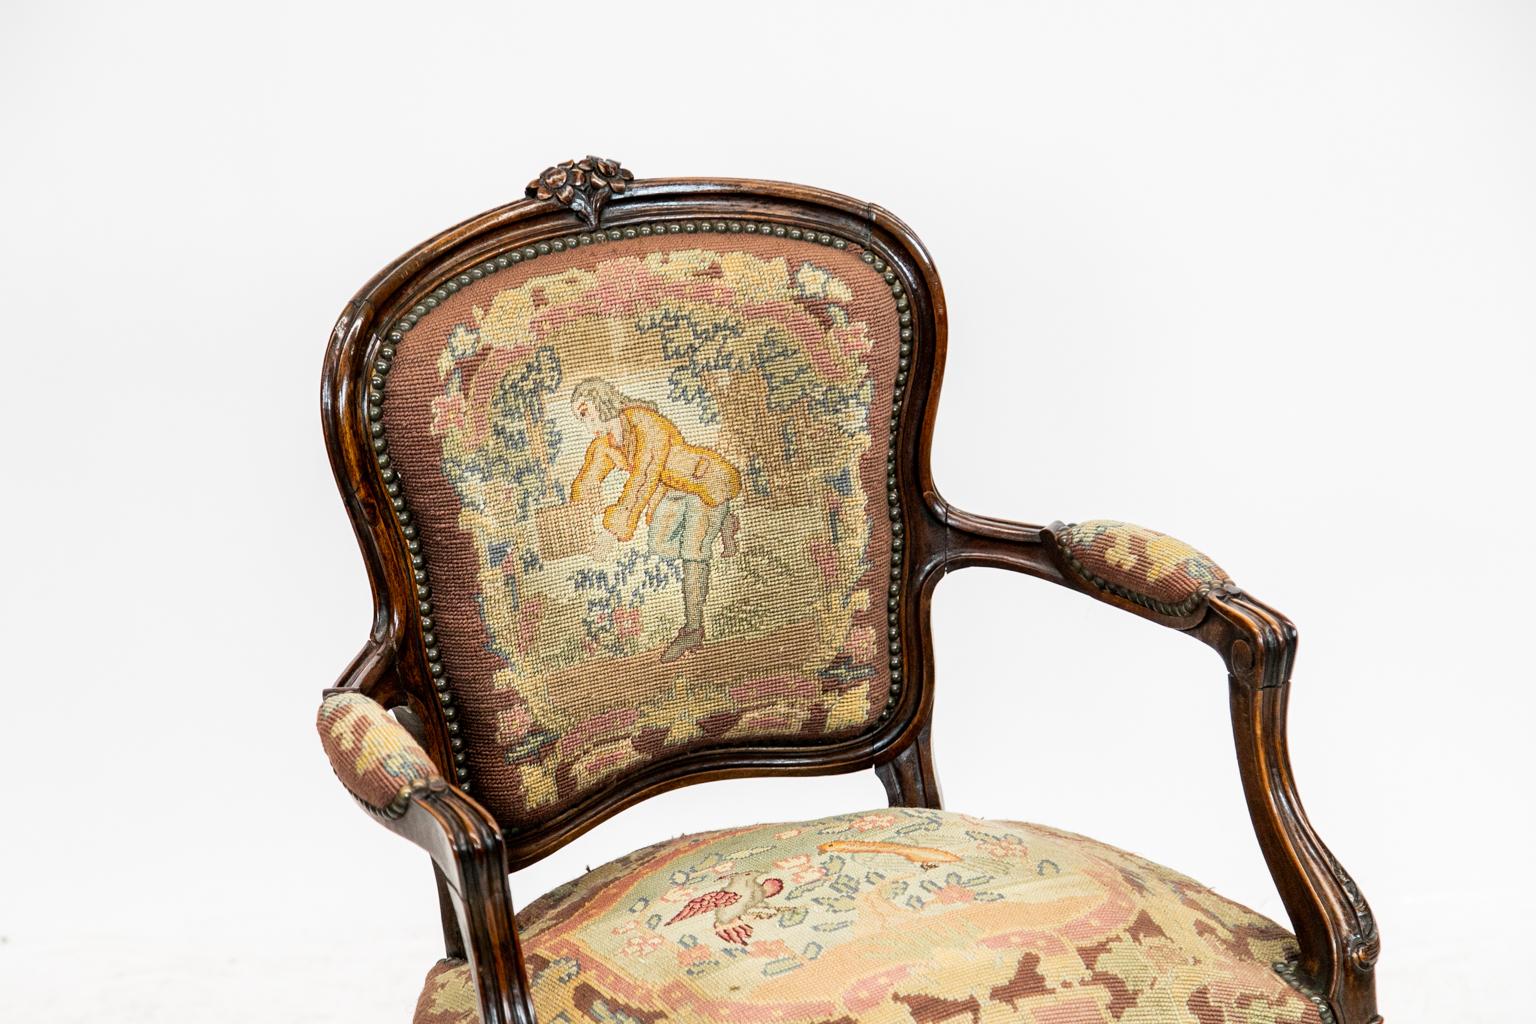 French walnut needlework armchair in the Louis XV style and carved with a floral crest. The needlework seat and back are bordered with brass studs. The man and bird figures in the needlepoint cartouche are done in petit point.
 